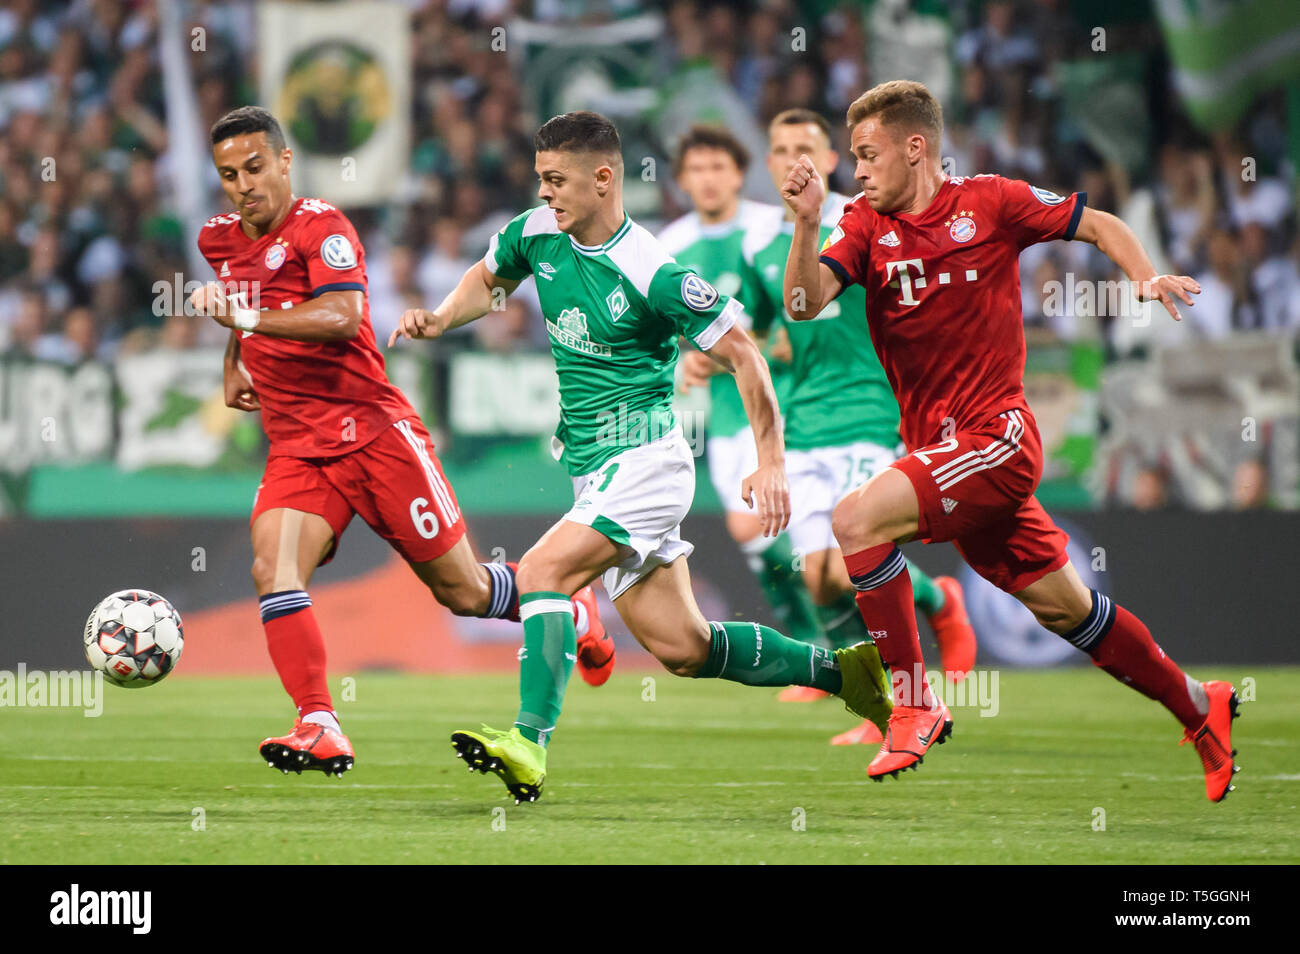 Bremen, Germany. 24th Apr, 2019. Bremen's Milot Rashica (2nd L) breaks through the defense from Bayern Munich's Joshua Kimmich (1st R) and Thiago (1st L) during a semifinal match of German Cup between SV Werder Bremen and FC Bayern Munich in Bremen, Germany, on April 24, 2019. Bremen lost 2-3. Credit: Kevin Voigt/Xinhua/Alamy Live News Stock Photo